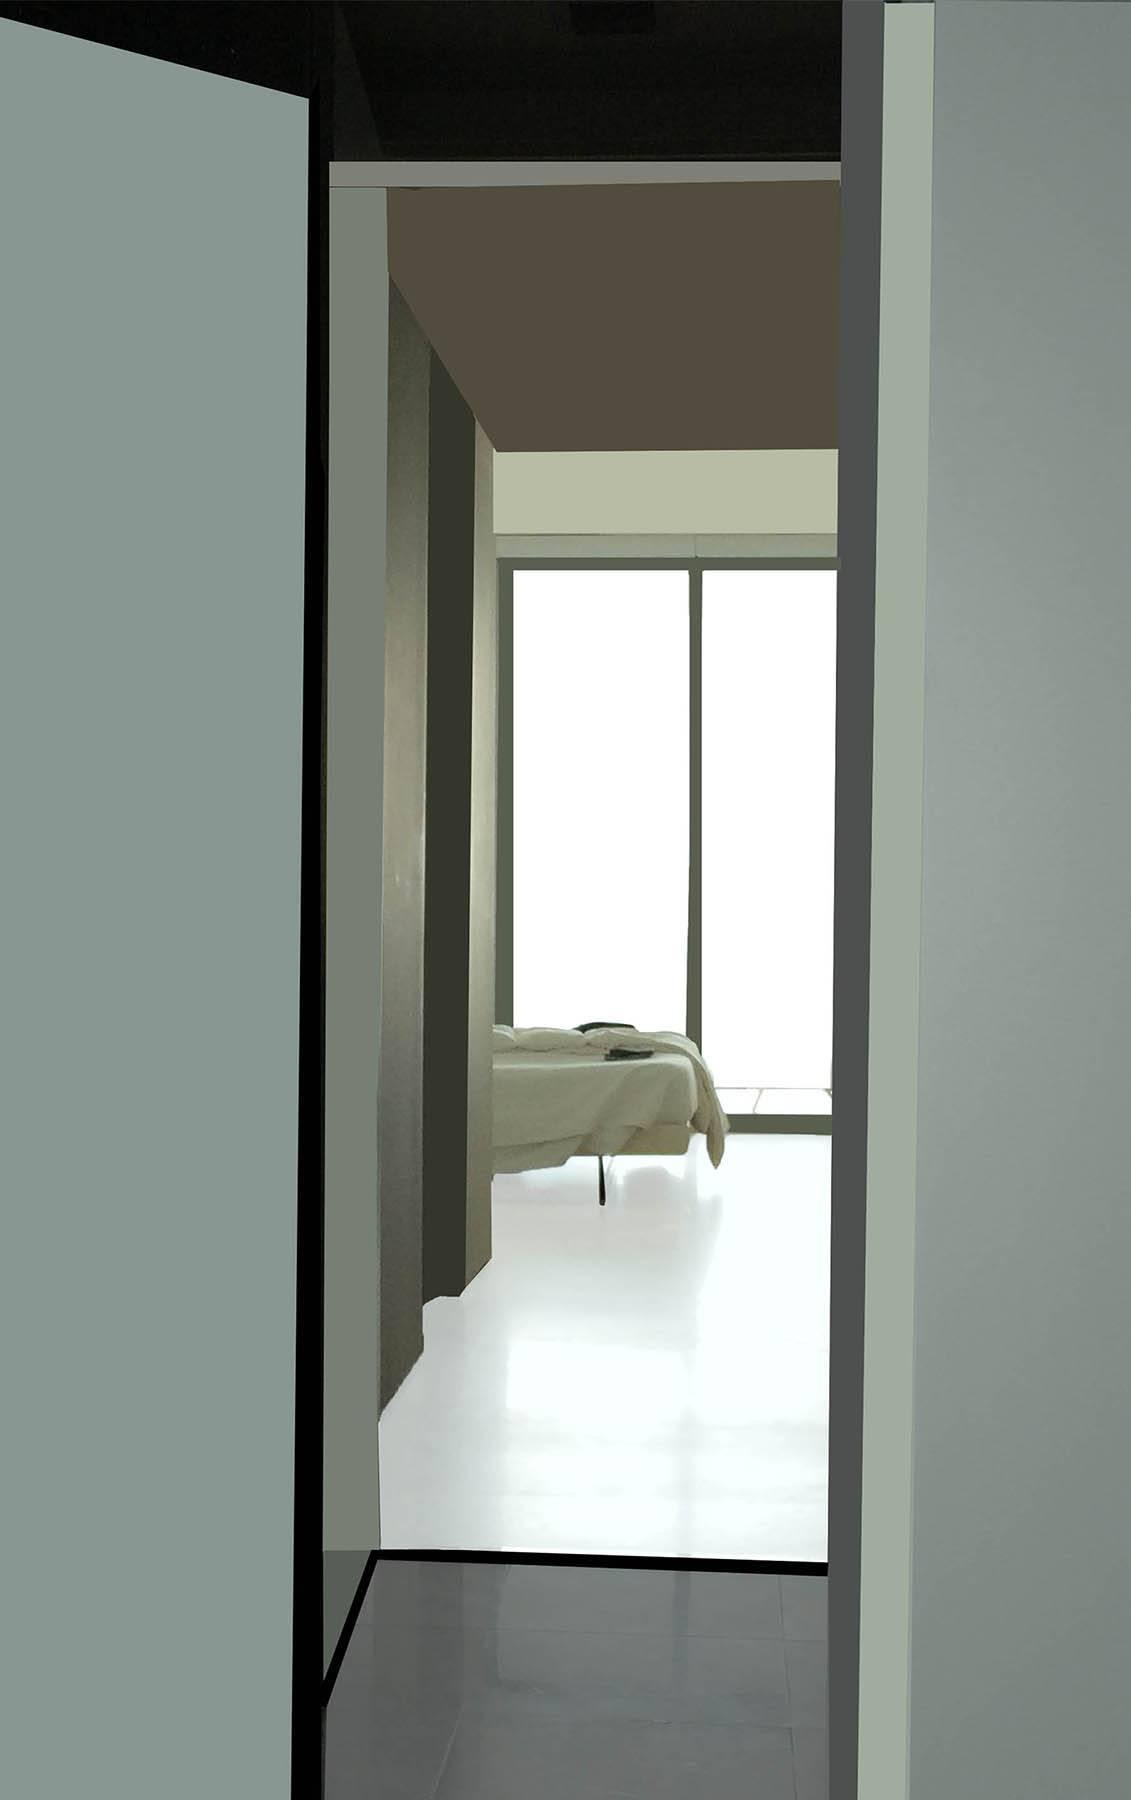 Stephanie Blumenthal Color Photograph - Bed: Contemporary Inkjet Print of Minimalist Interior in Muted Teal, Black Frame